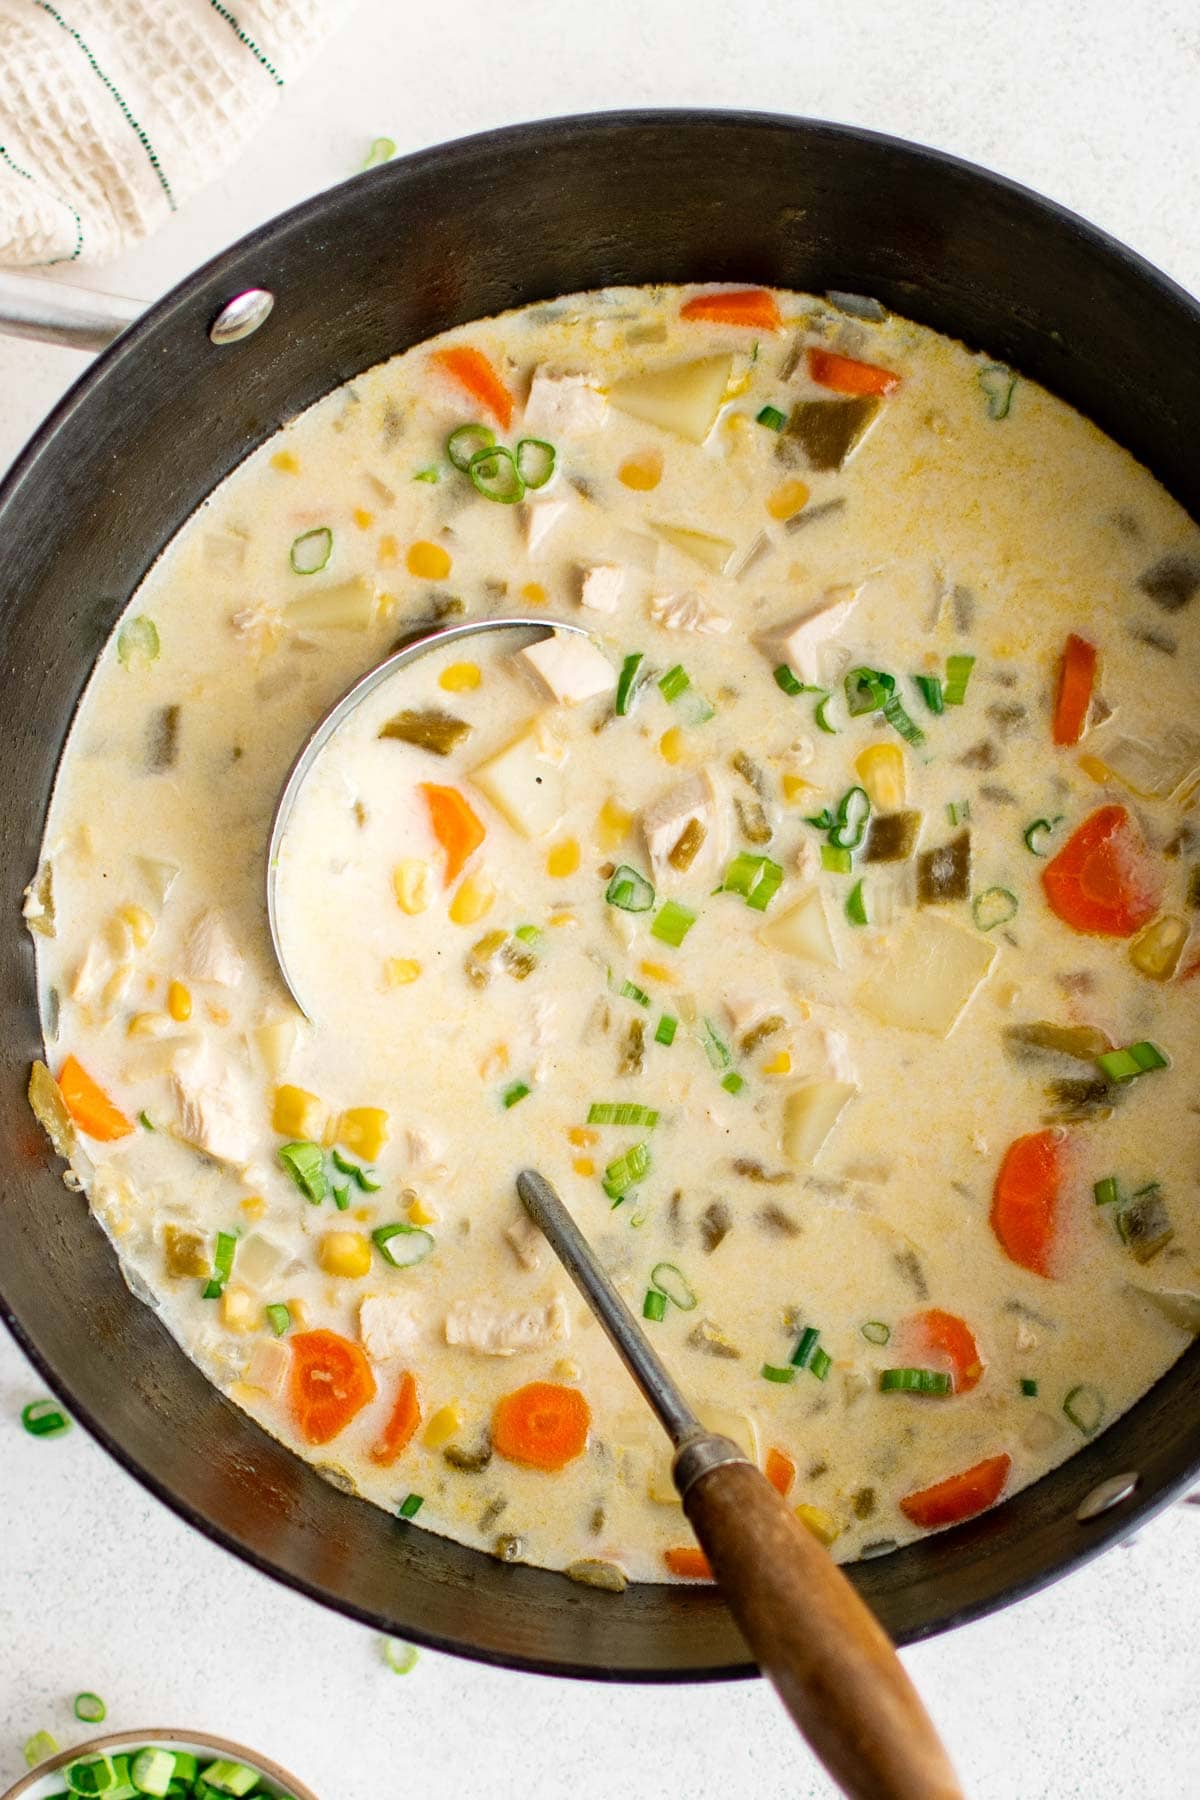 Big pot of creamy chicken and vegetable soup.